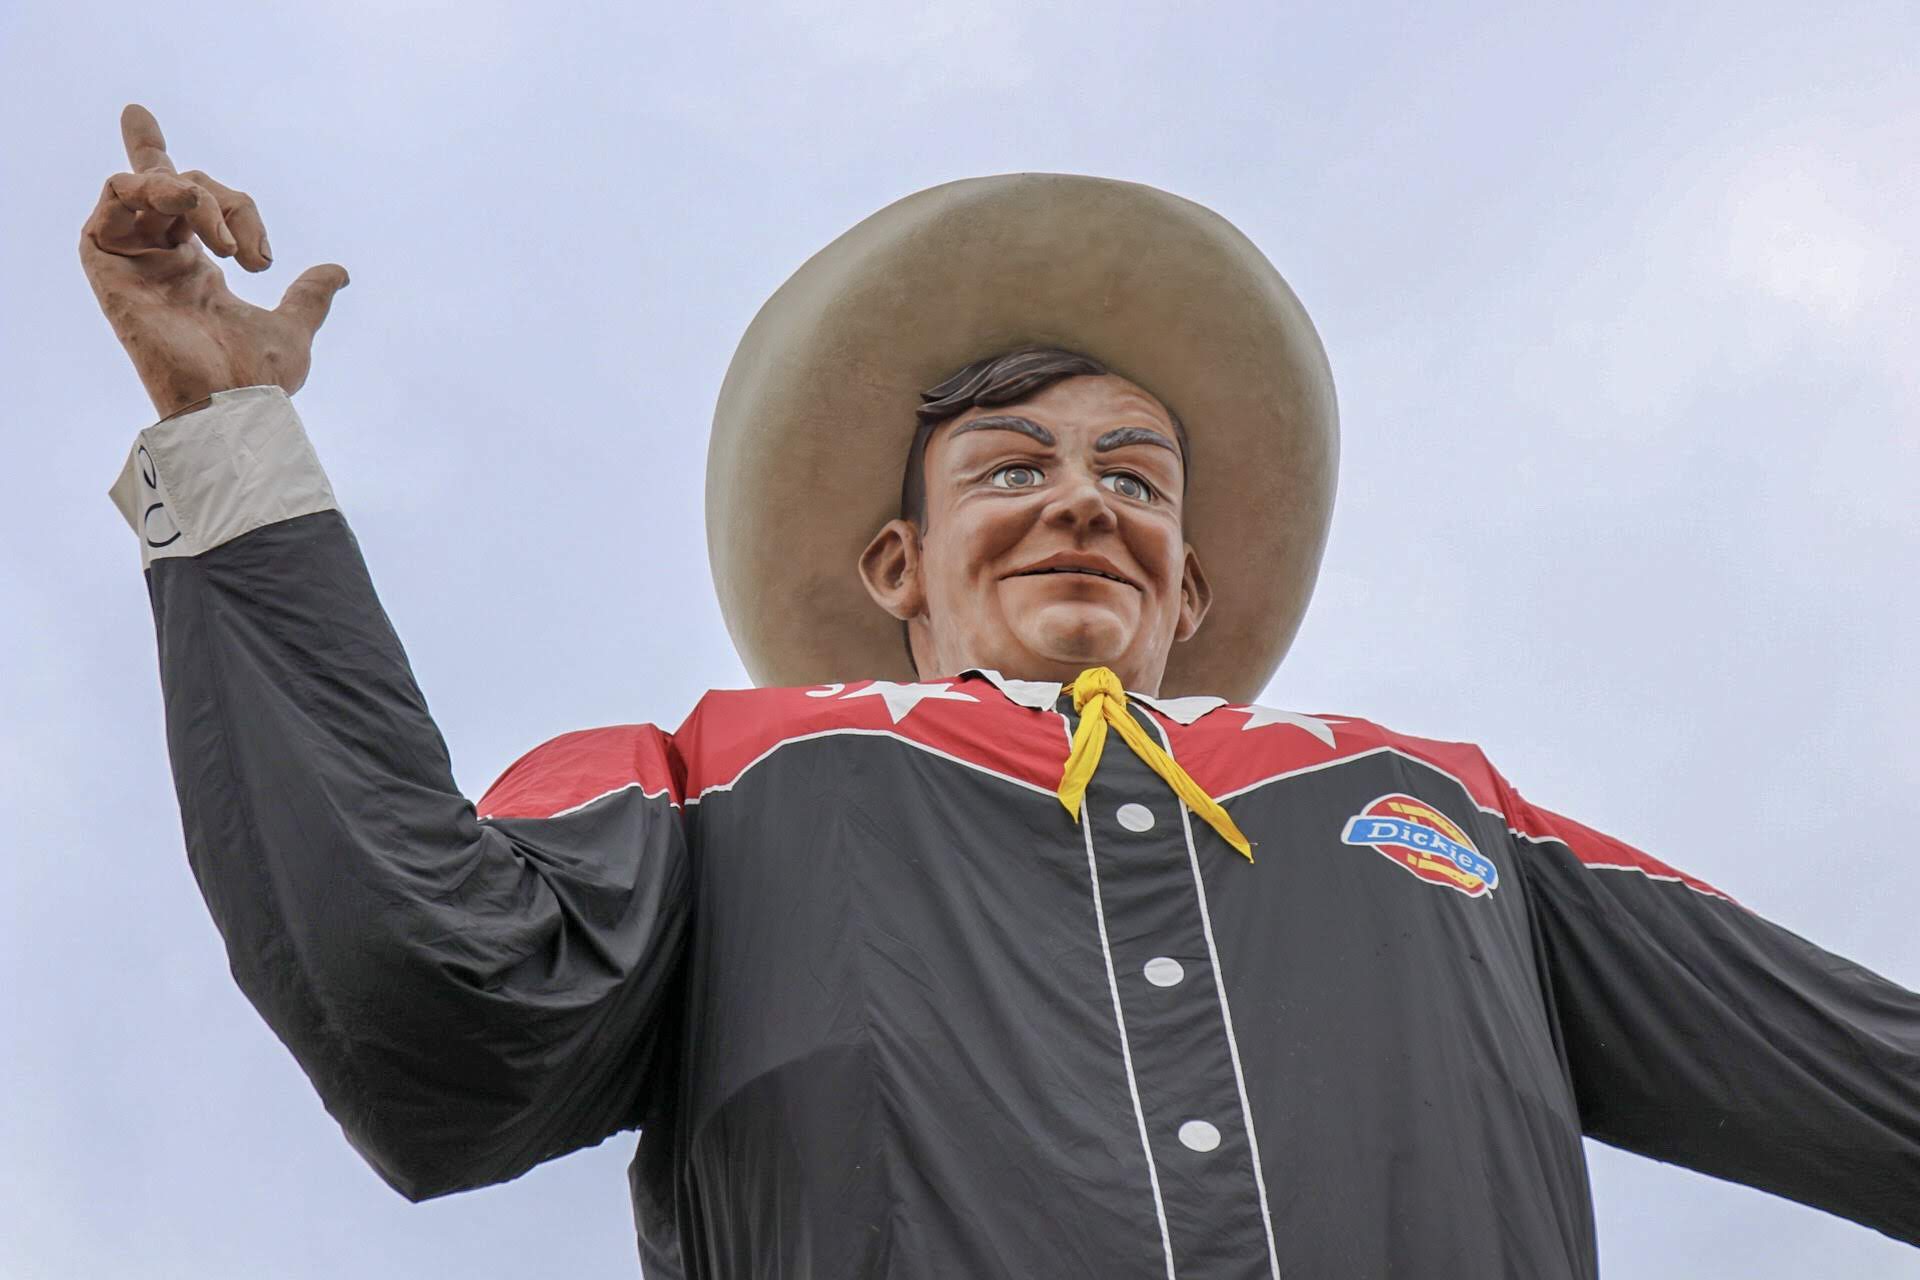 Things to know about Big Tex, the tallest Texan at the State Fair of Texas - Houston ...1920 x 1280